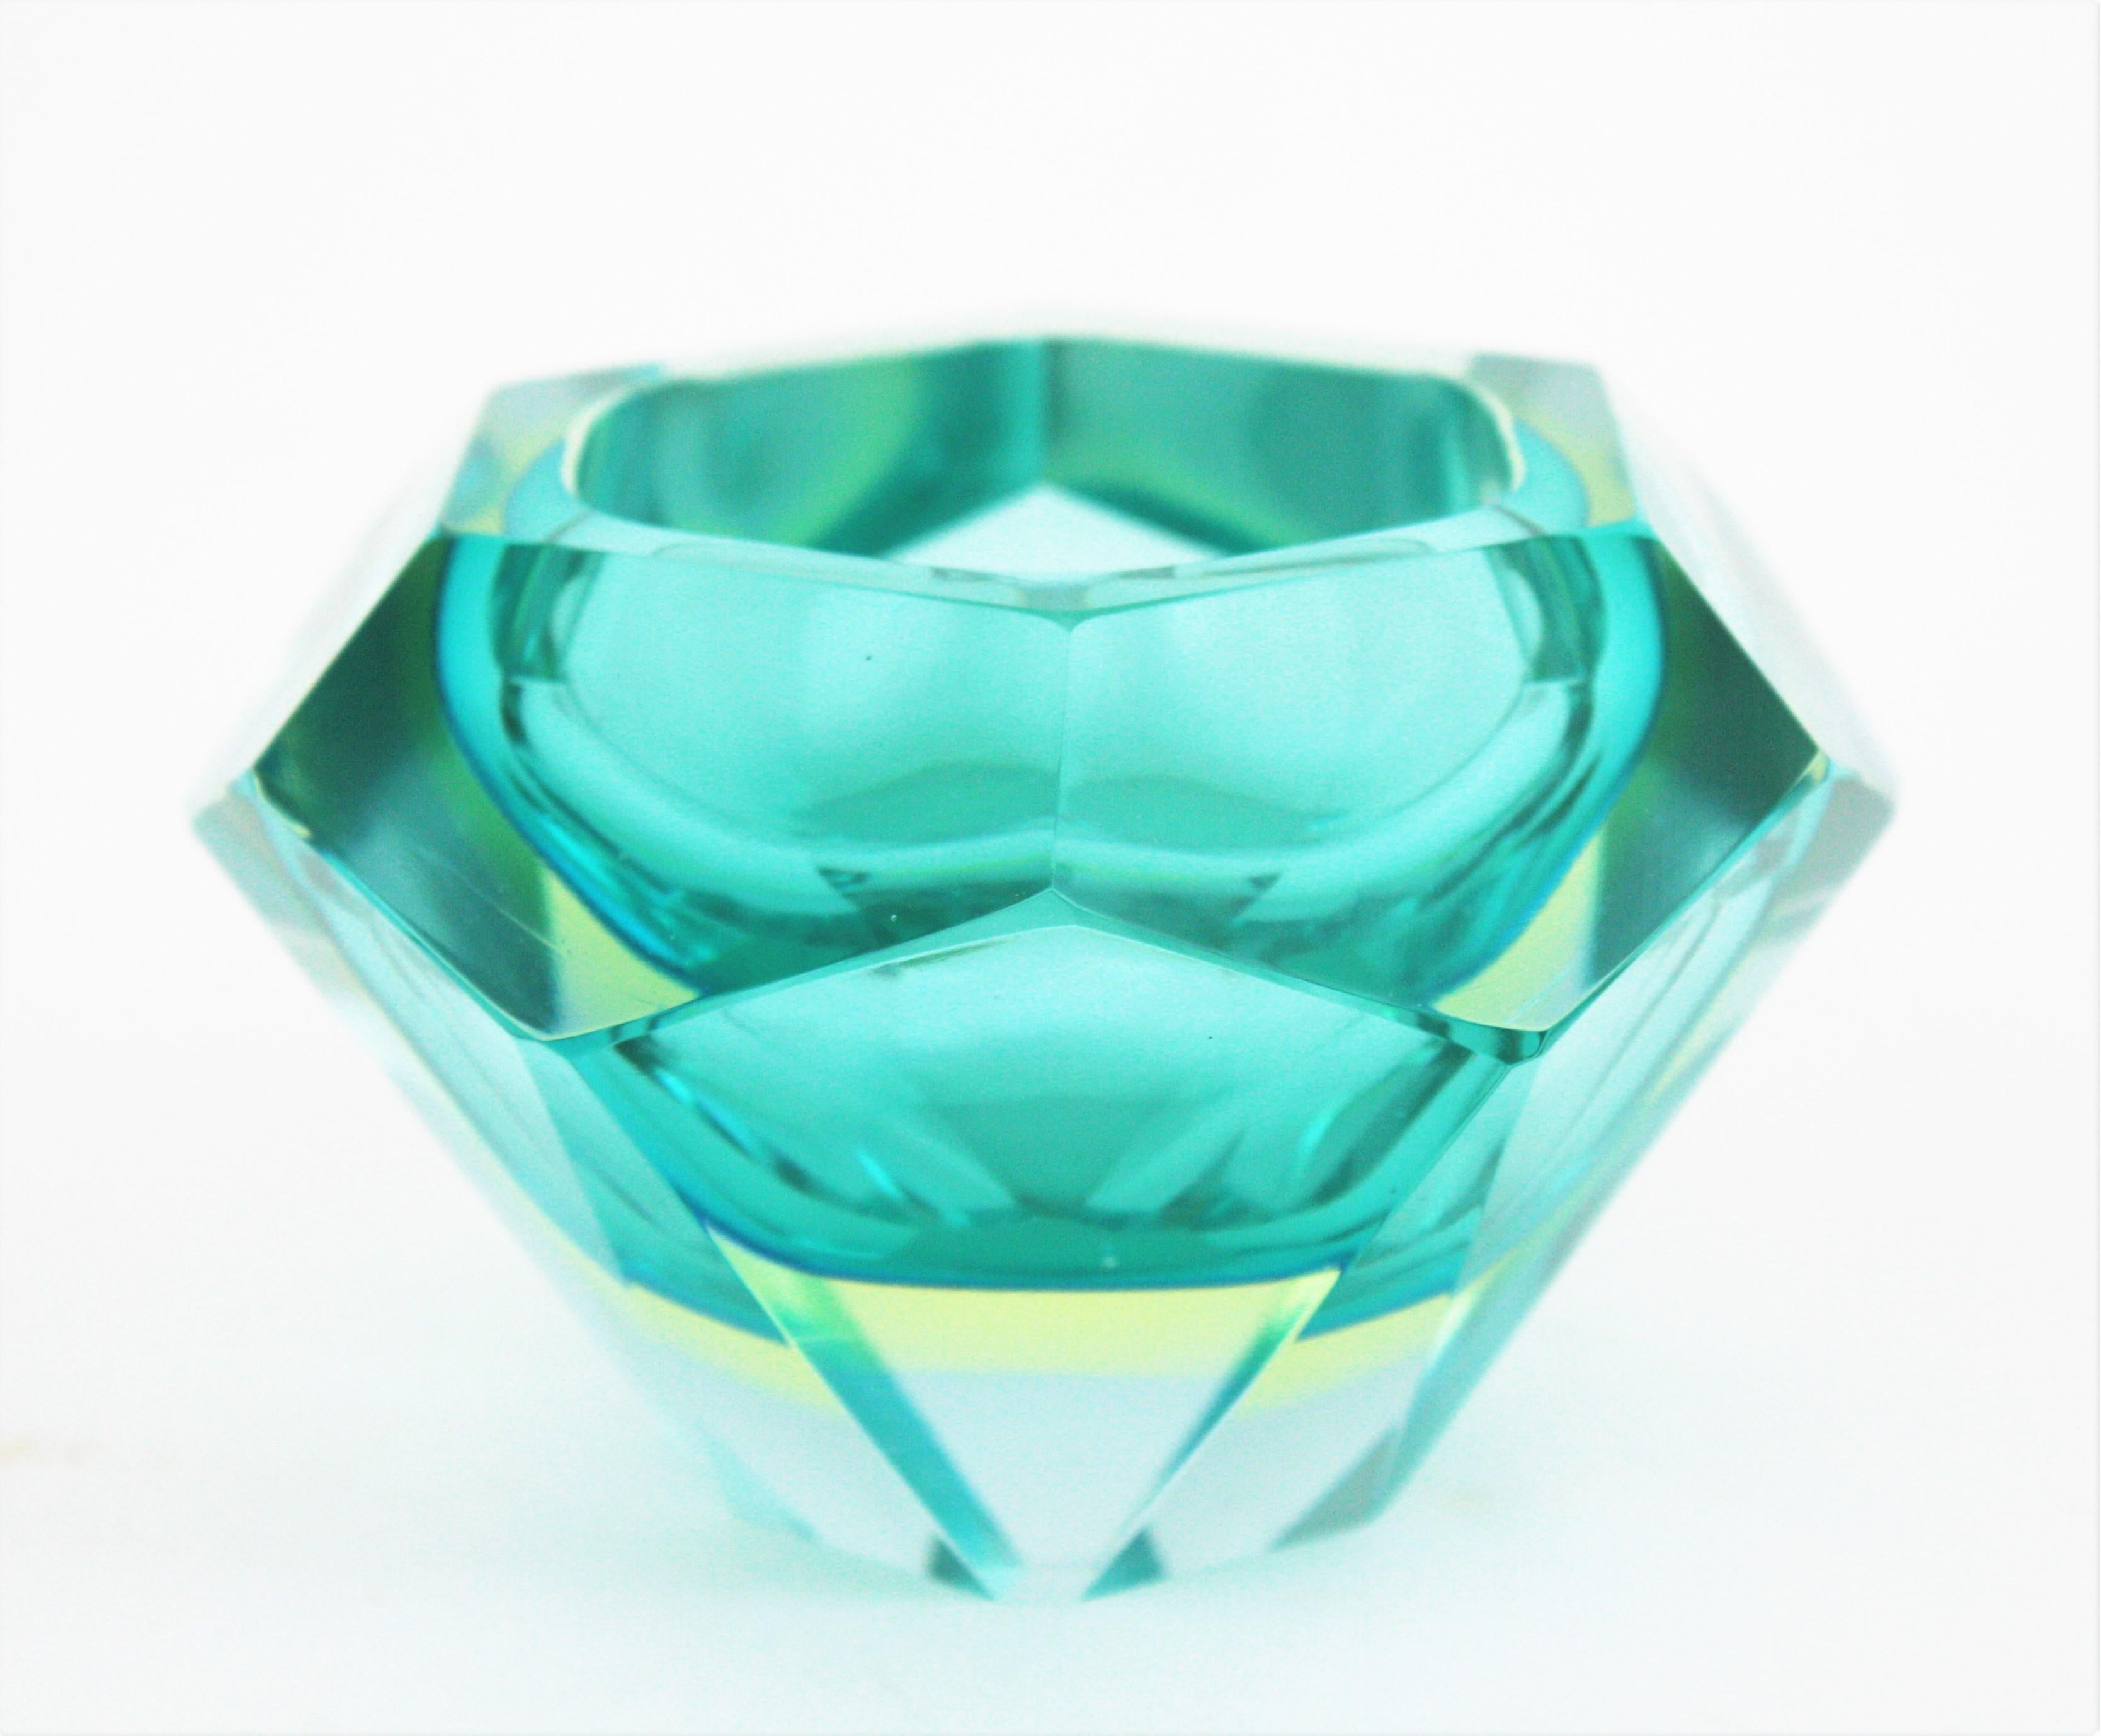 Mid-Century Modern Flavio Poli Sommerso Turquoise Blue Yellow Diamond Faceted Murano Art Glass Bowl For Sale